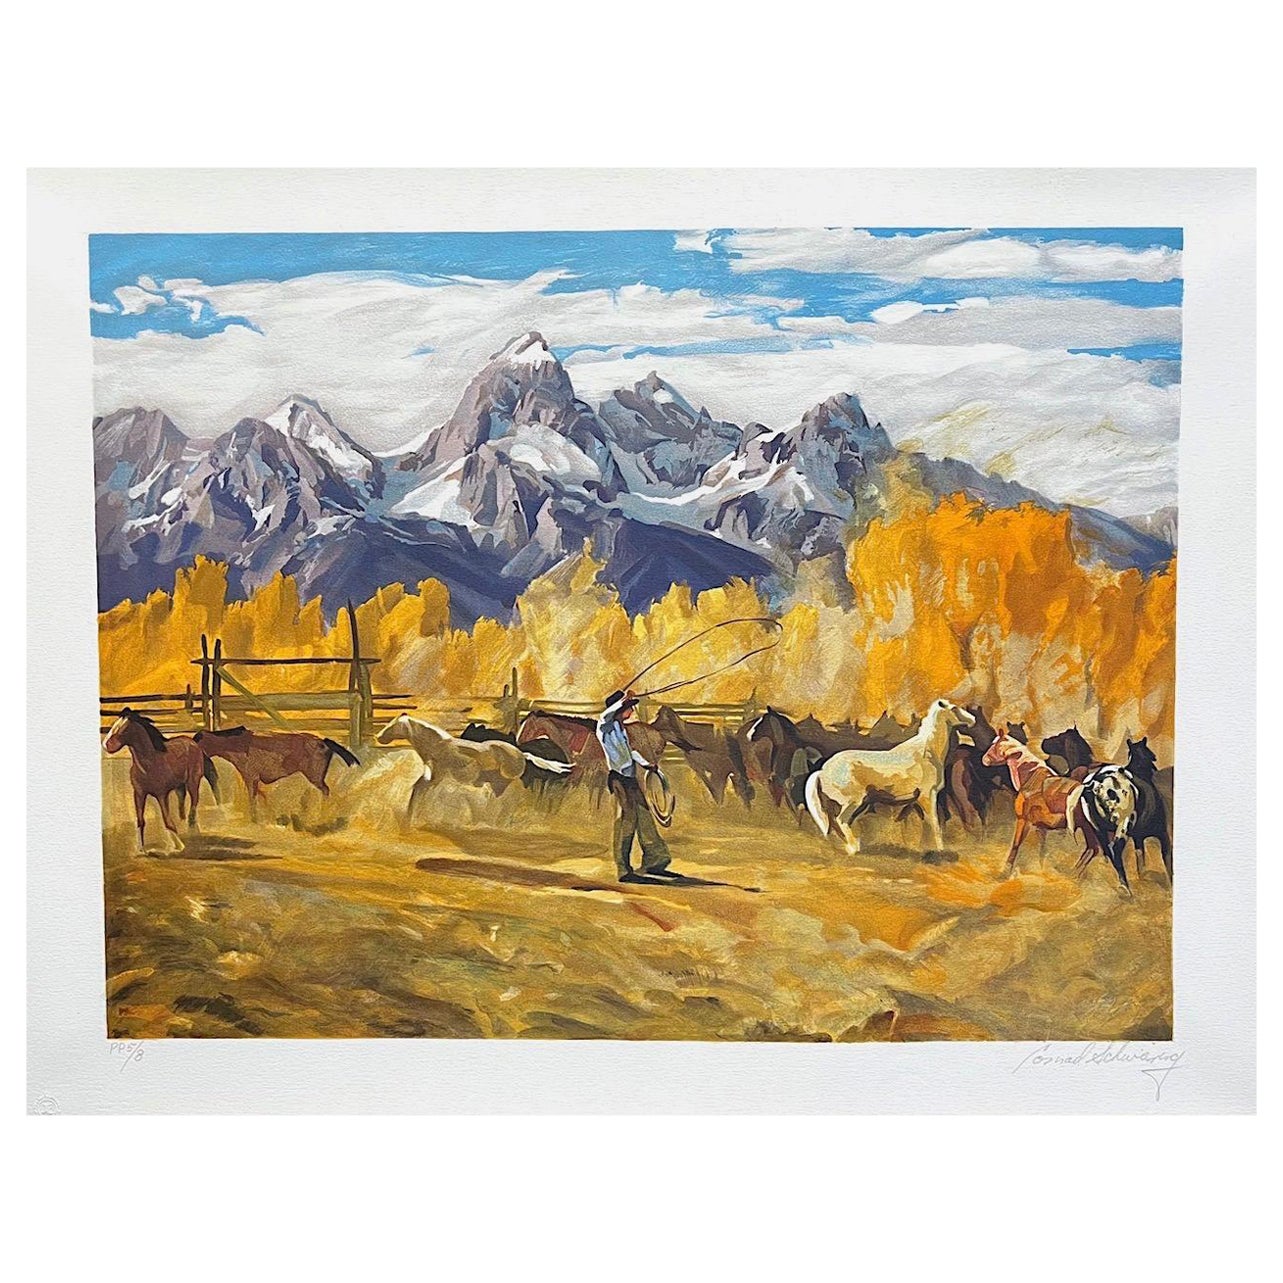 Conrad Schwiering Animal Print - SINGLIN' OUT Signed Lithograph, American Cowboy Roping Horses, Rocky Mountains